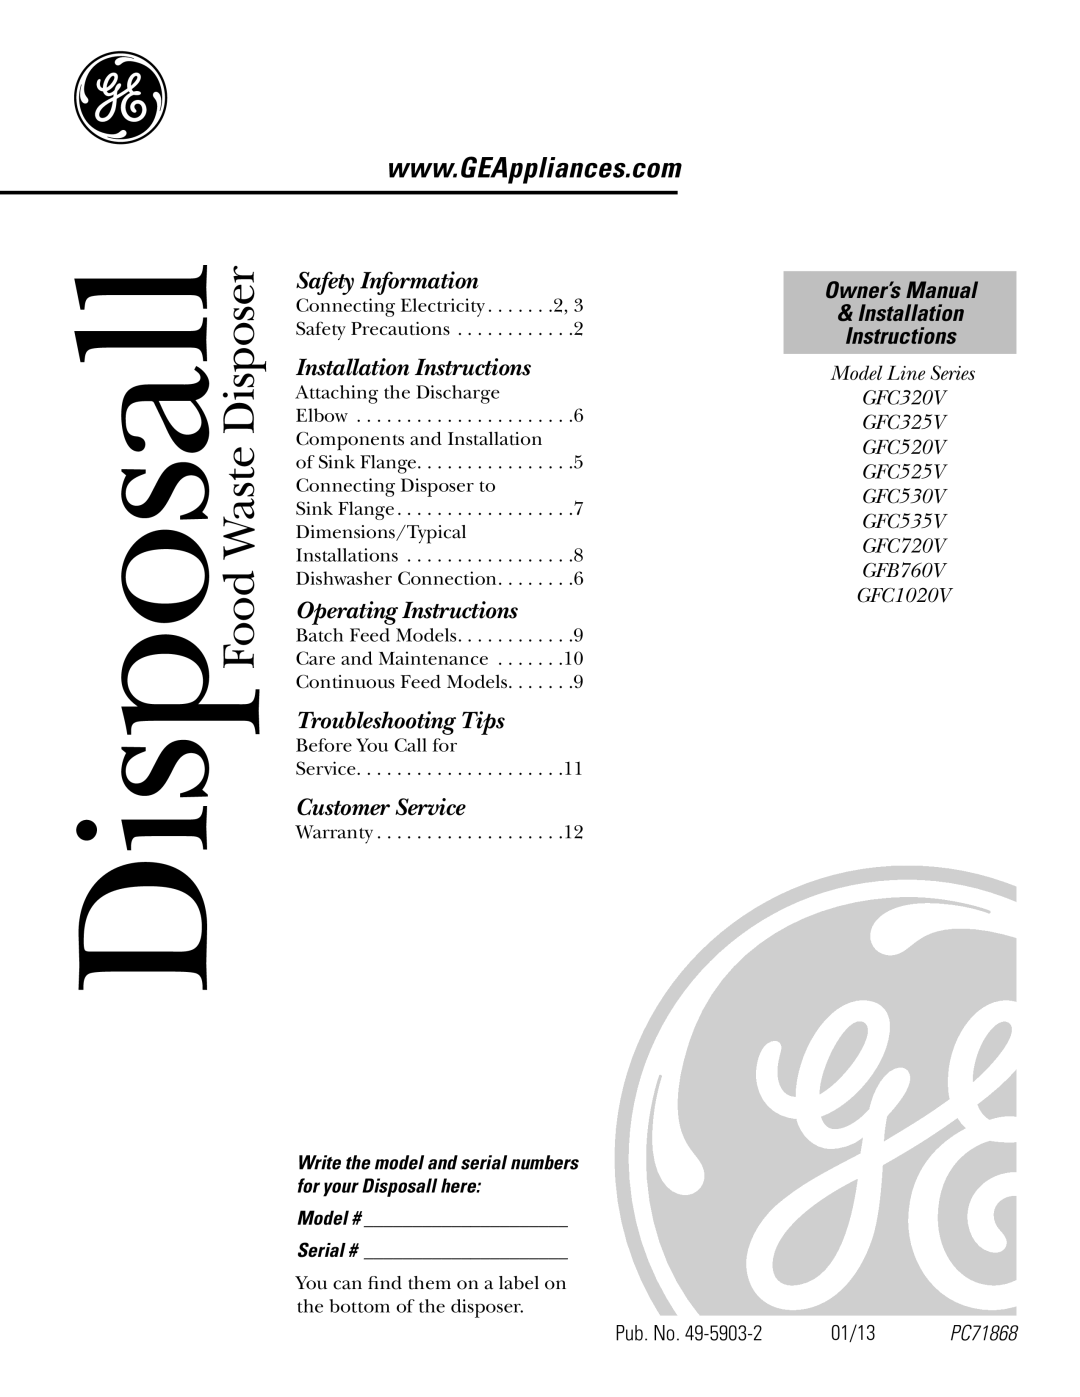 GE GFC325V installation instructions Food Waste Disposer, Disposall, Safety Information, Installation Instructions, 01/13 